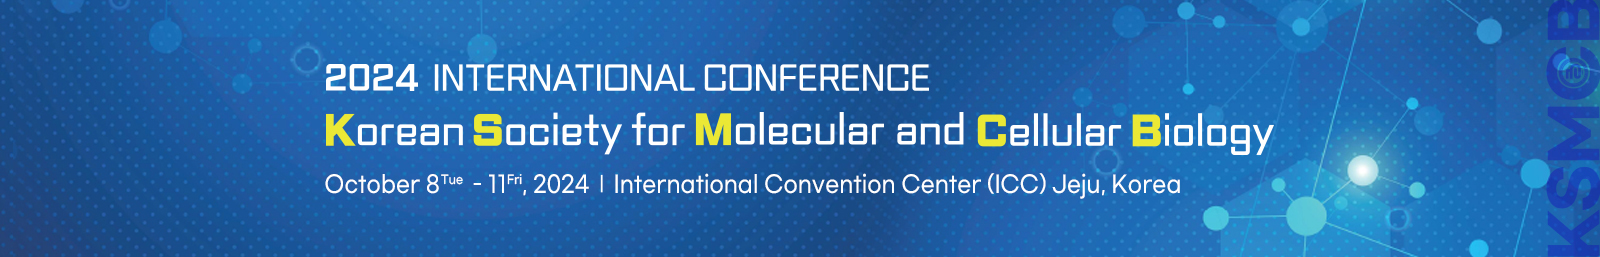 2024 International conference of the Korean society for molecular and cellular biology